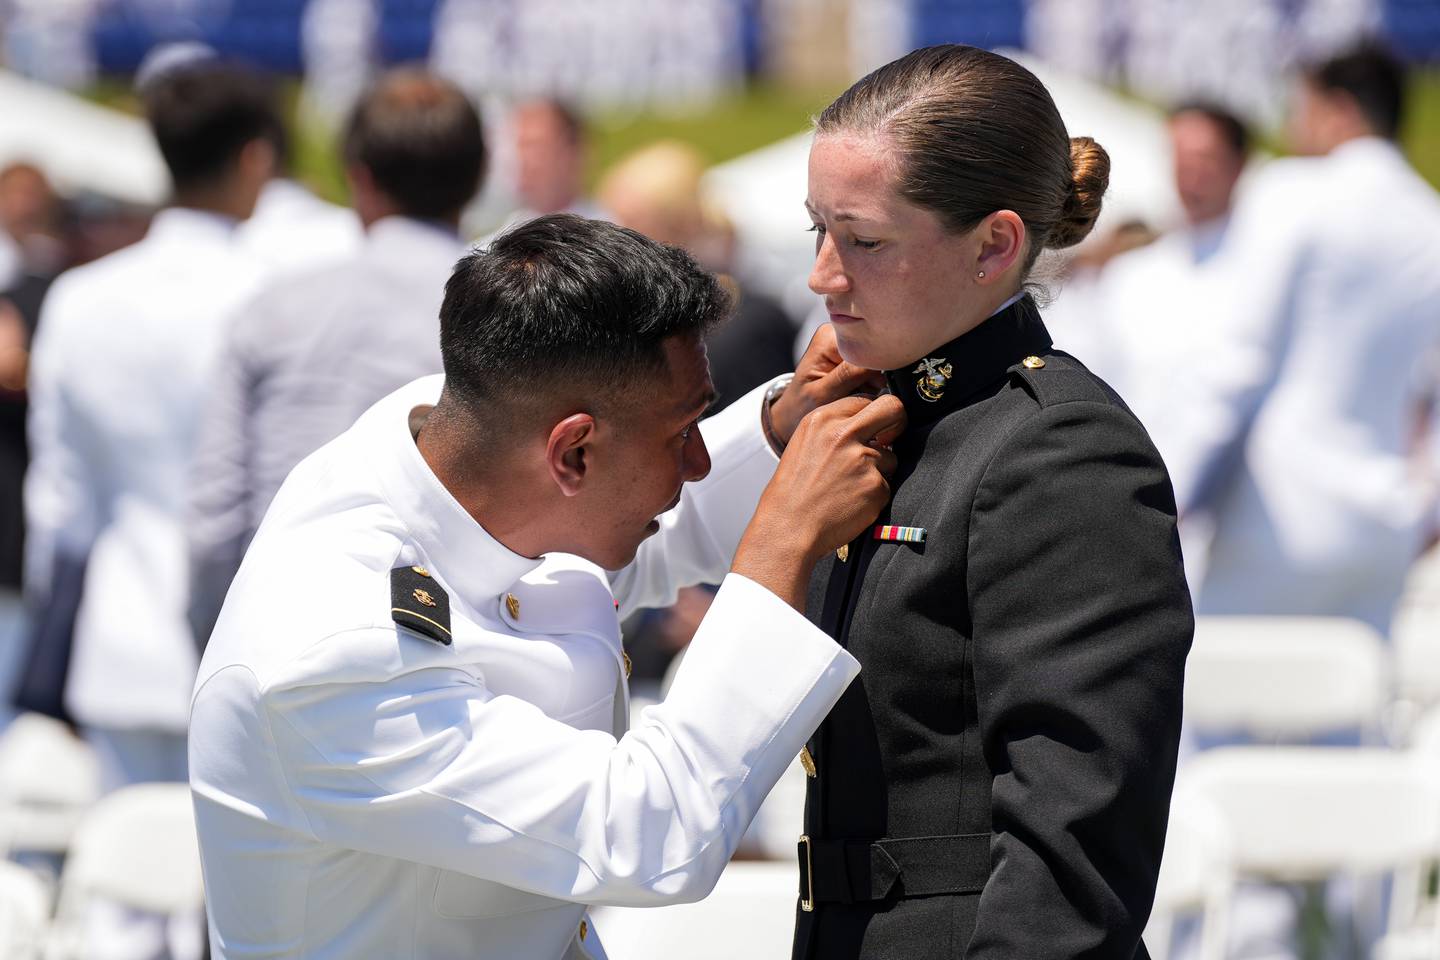 One just-graduated ensign helps adjust the collar of a newly commissioned second lieutenant at the conclusion of the U.S. Naval Academy’s graduation ceremony at the Navy-Marine Corps Memorial Stadium on May 26, 2023. The graduating midshipmen are commissioned as either an ensign in the U.S. Navy or a 2nd Lieutenant in the U.S. Marine Corps.